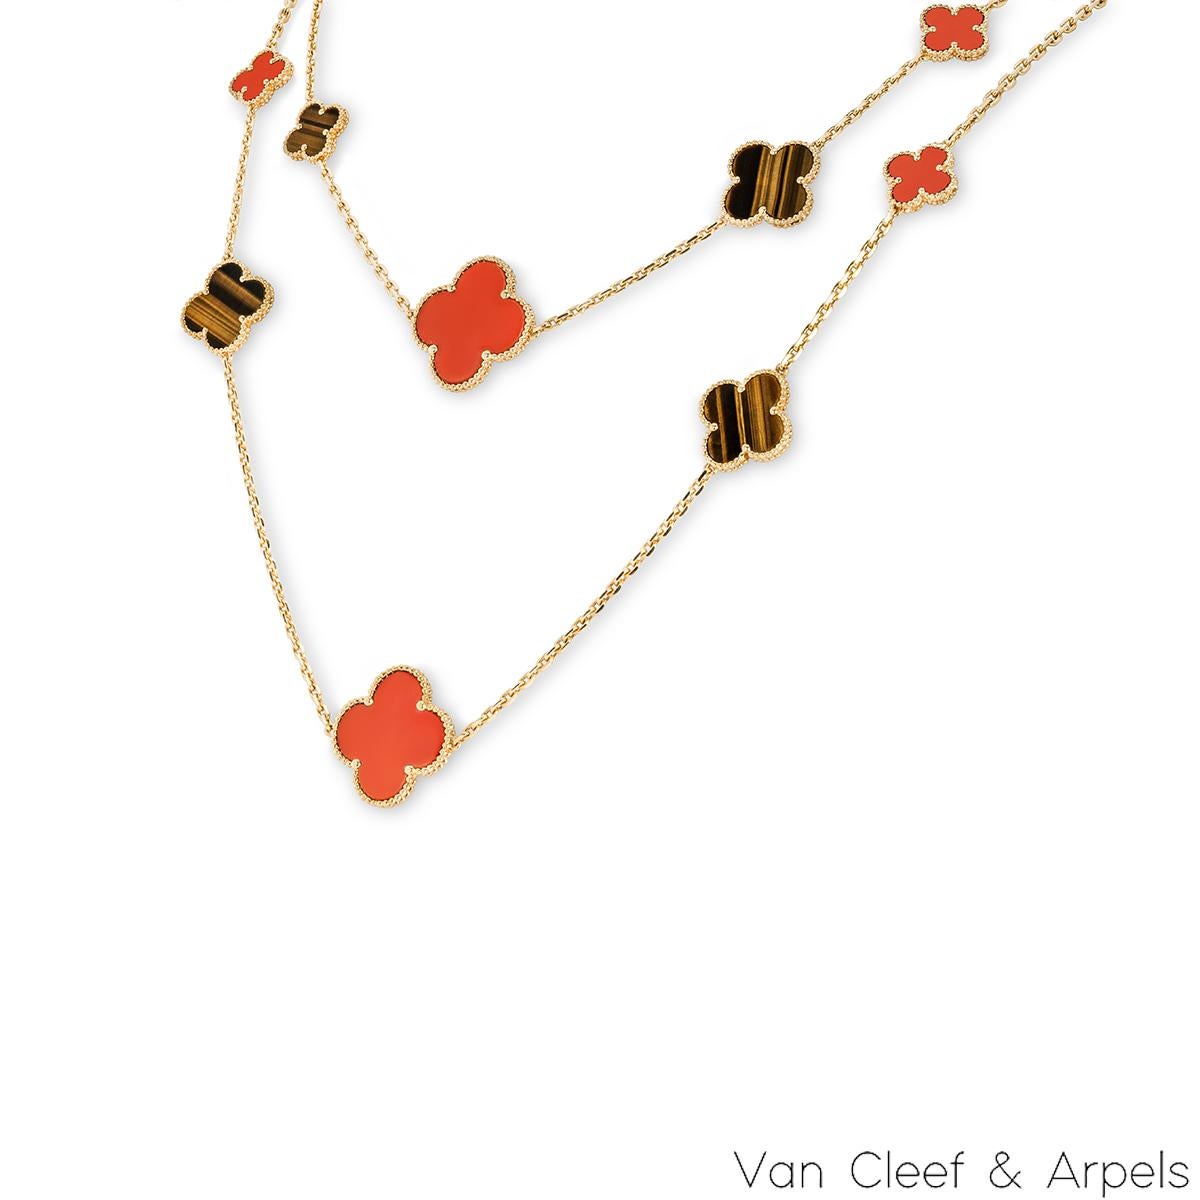 An exquisite 18k yellow gold Van Cleef & Arpels necklace from the Magic Alhambra collection. The necklace comprises of 16 iconic 4 leaf clover motifs alternating in size, set with carnelian and tiger's eye inlays and complemented by a beaded outer